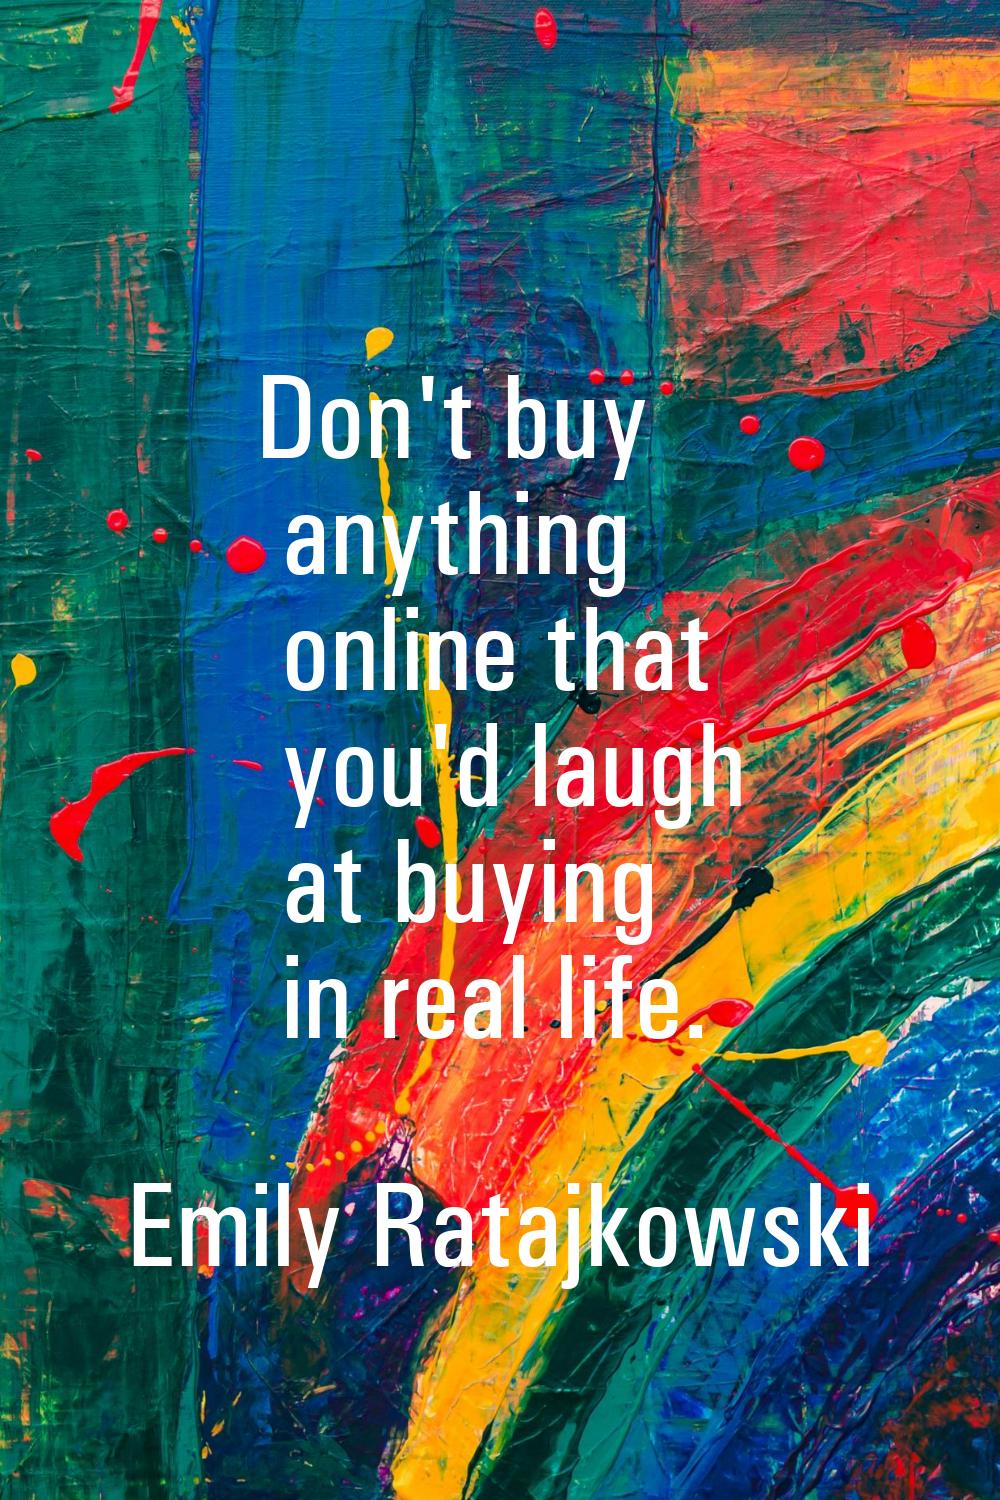 Don't buy anything online that you'd laugh at buying in real life.